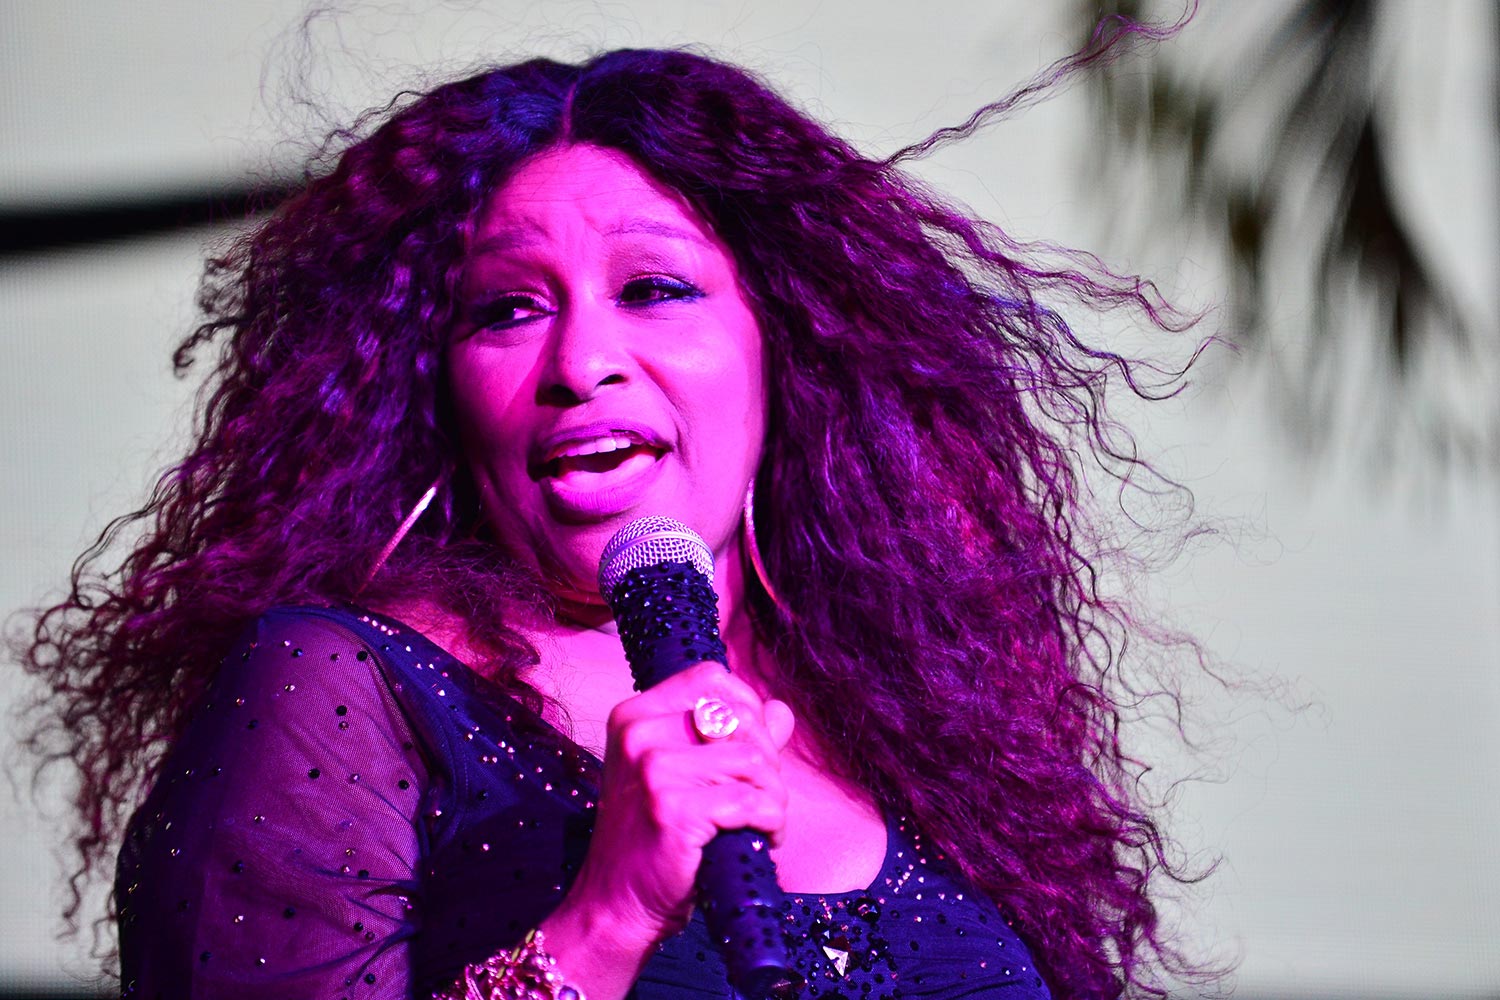 Chaka Khan performs live on stage during a social distance open air evening under the stars “From Be Bop 2 Hip Hop” with Dinner Supper Club at the Historic Hampton House on May 8, 2021 in Miami, Florida.